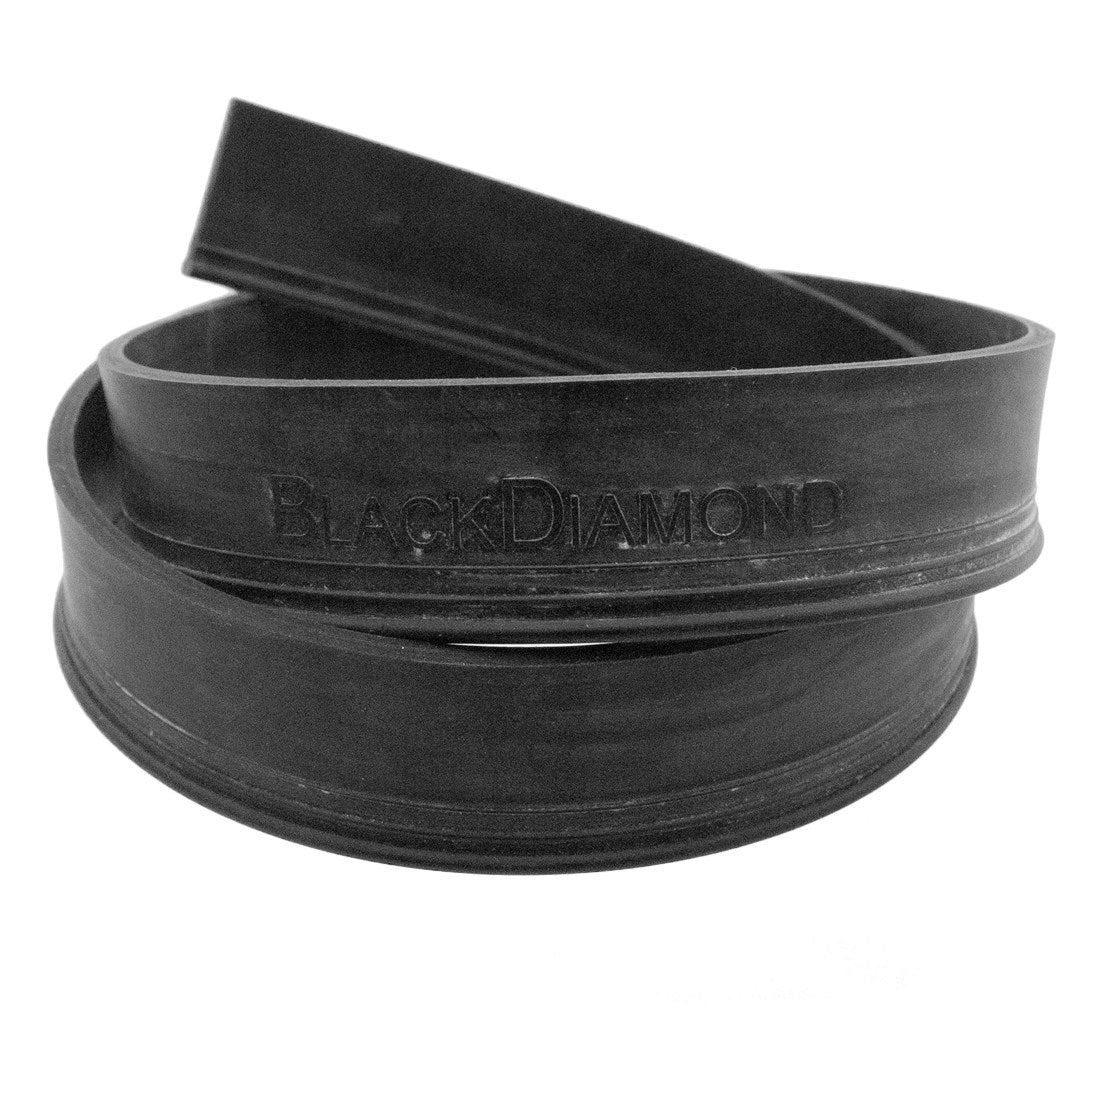 BlackDiamond Flat Top Squeegee Rubber Curled View